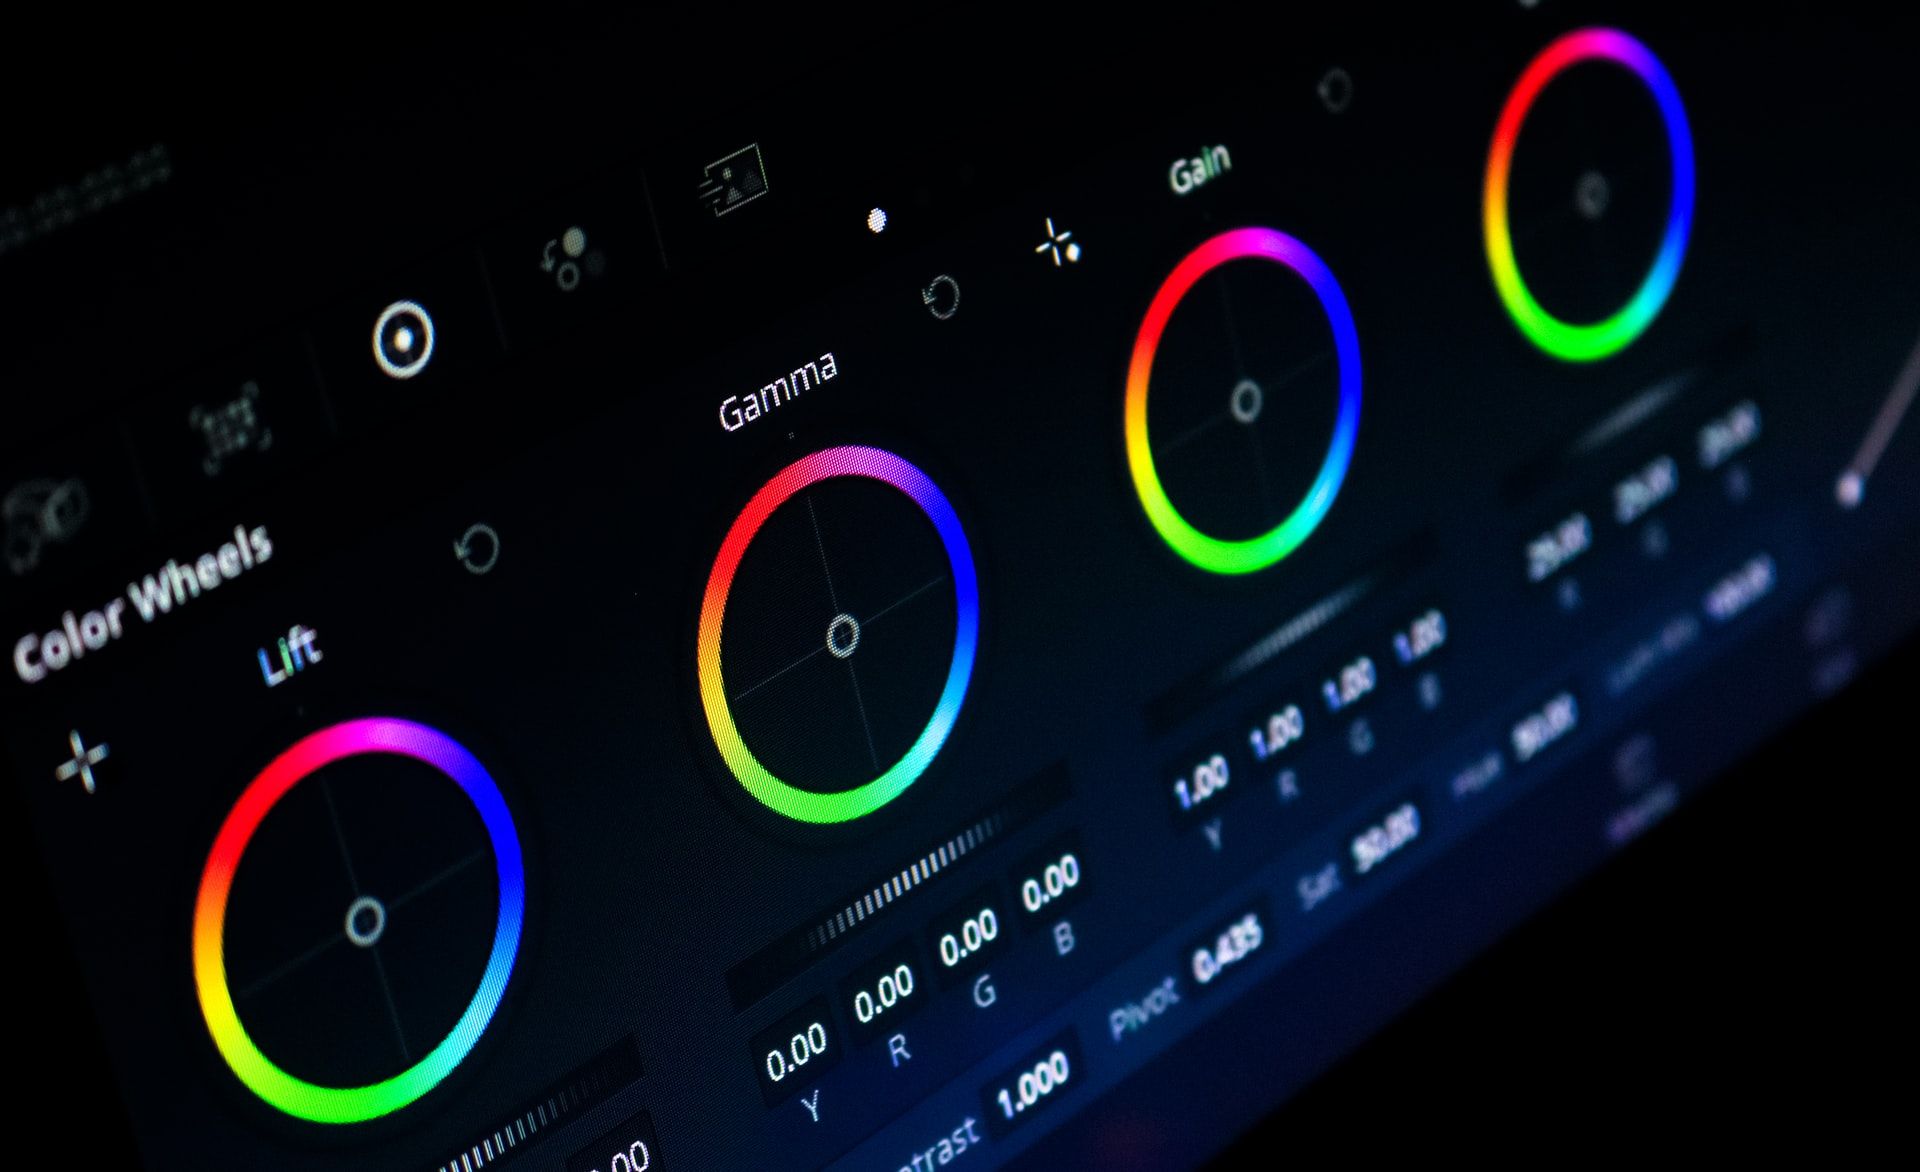 How to Use Color Grading in Adobe Photoshop, Premiere Pro and DaVinci Resolve